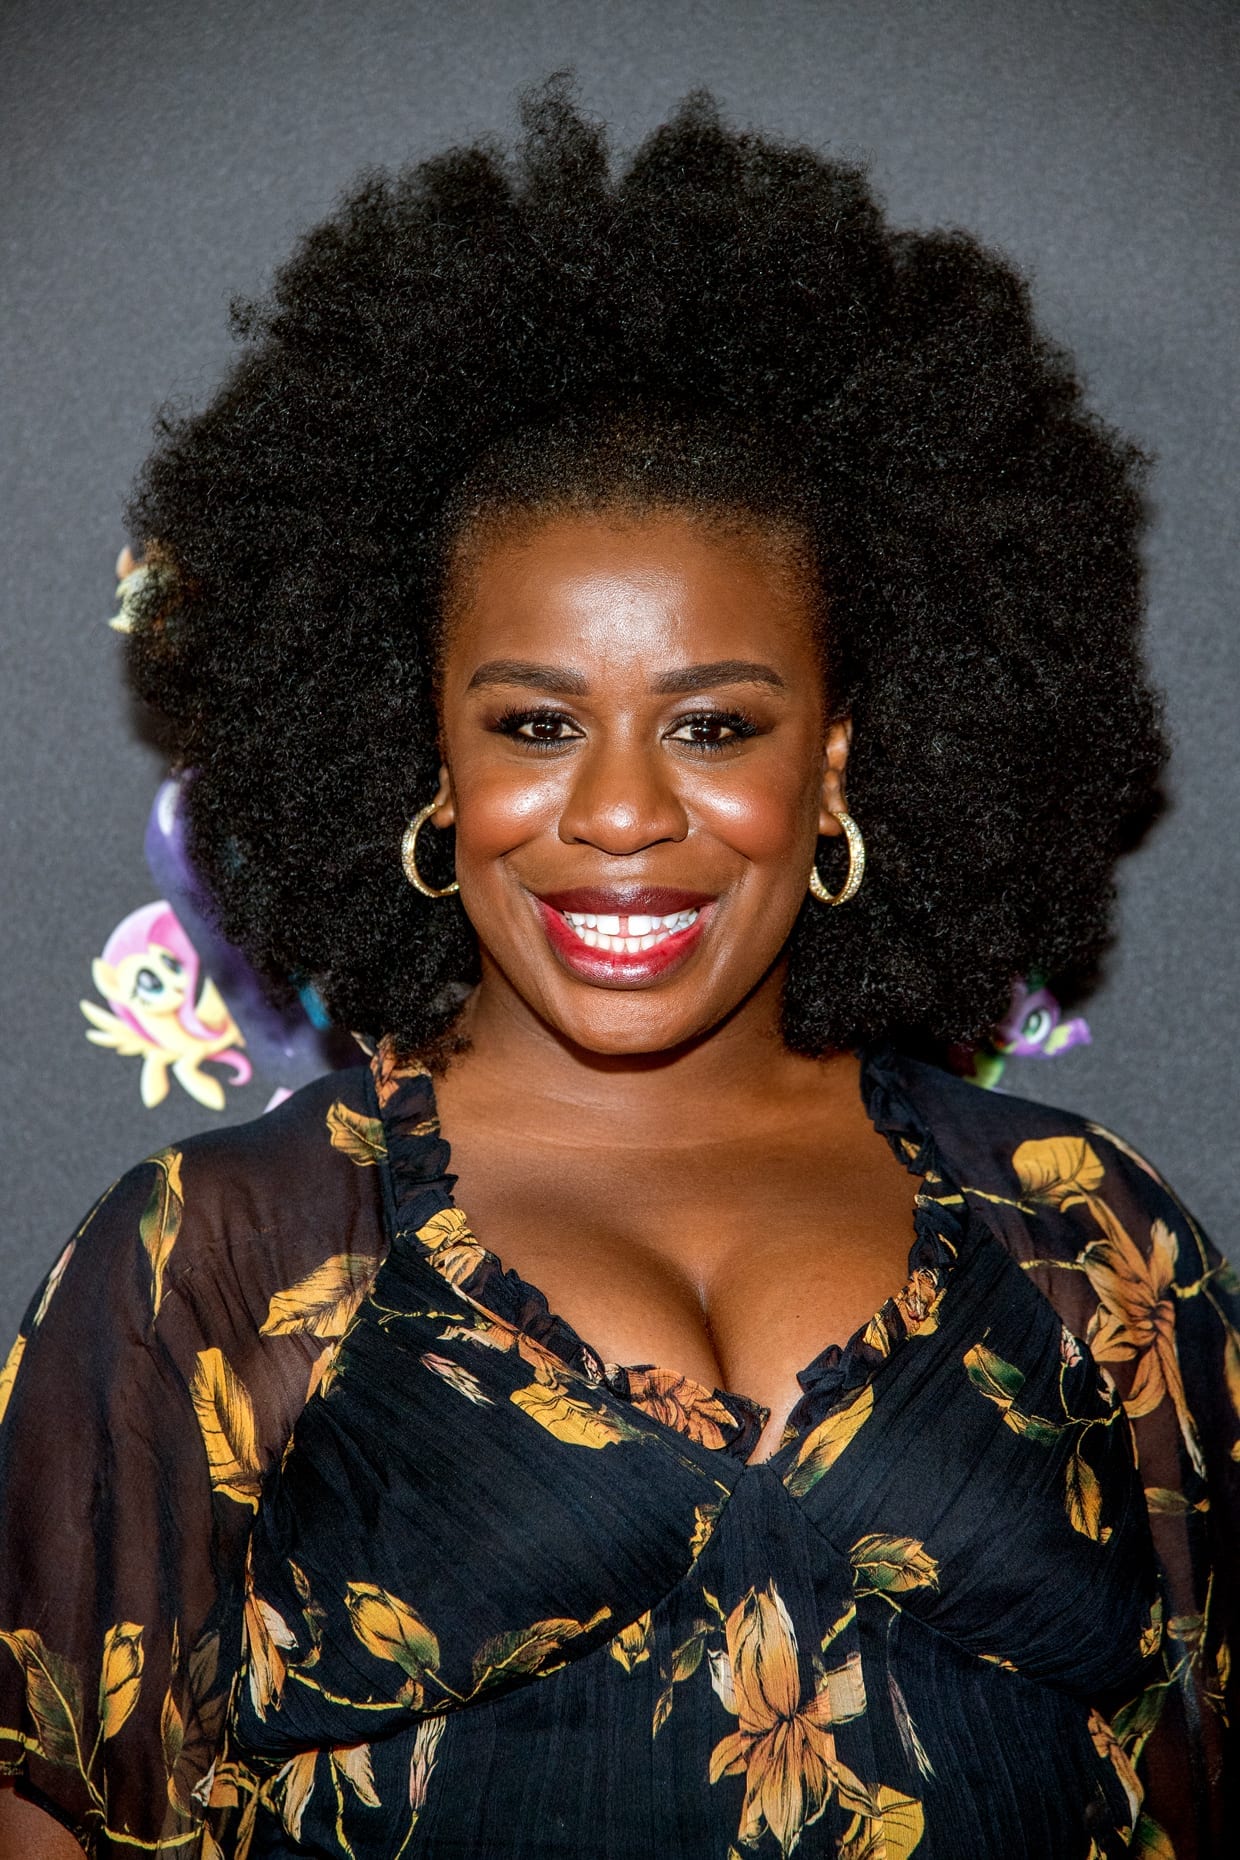 Uzo Aduba attends 'My Little Pony: The Movie' screening at AMC Lincoln Square Theater in New York City, Sept. 24, 2017.